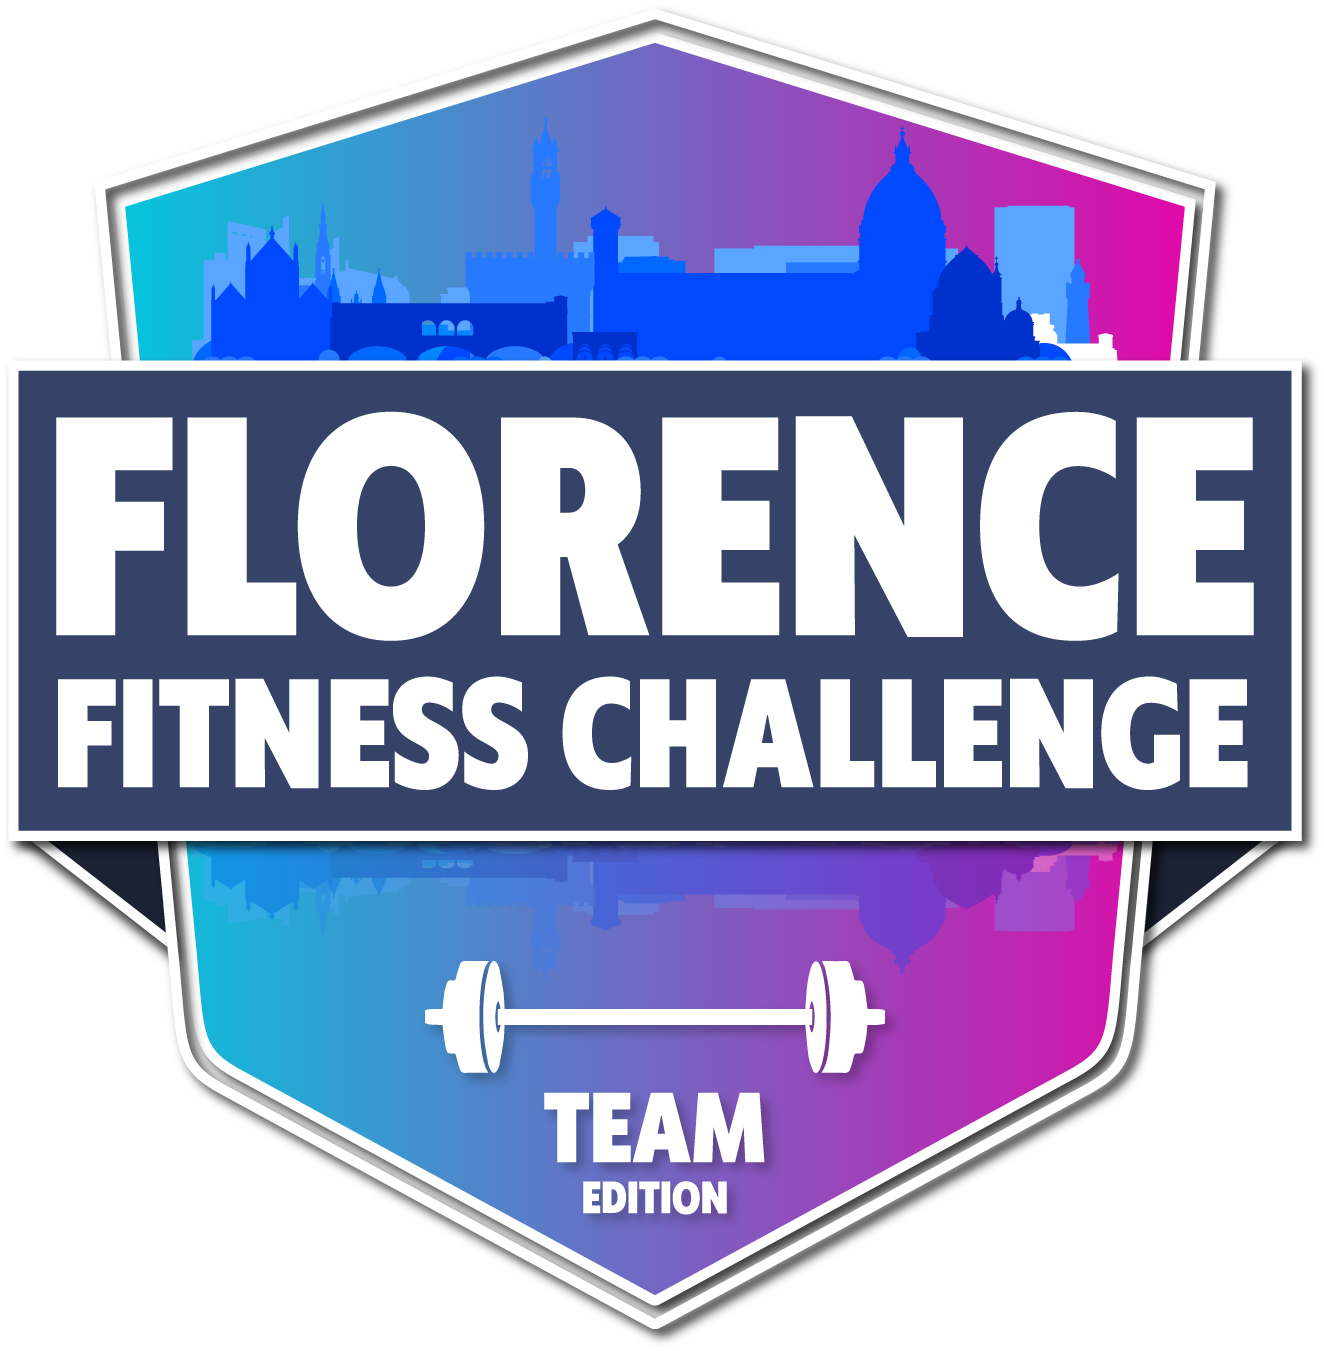 FLORENCE FITNESS CHALLENGE - TEAM EDITION